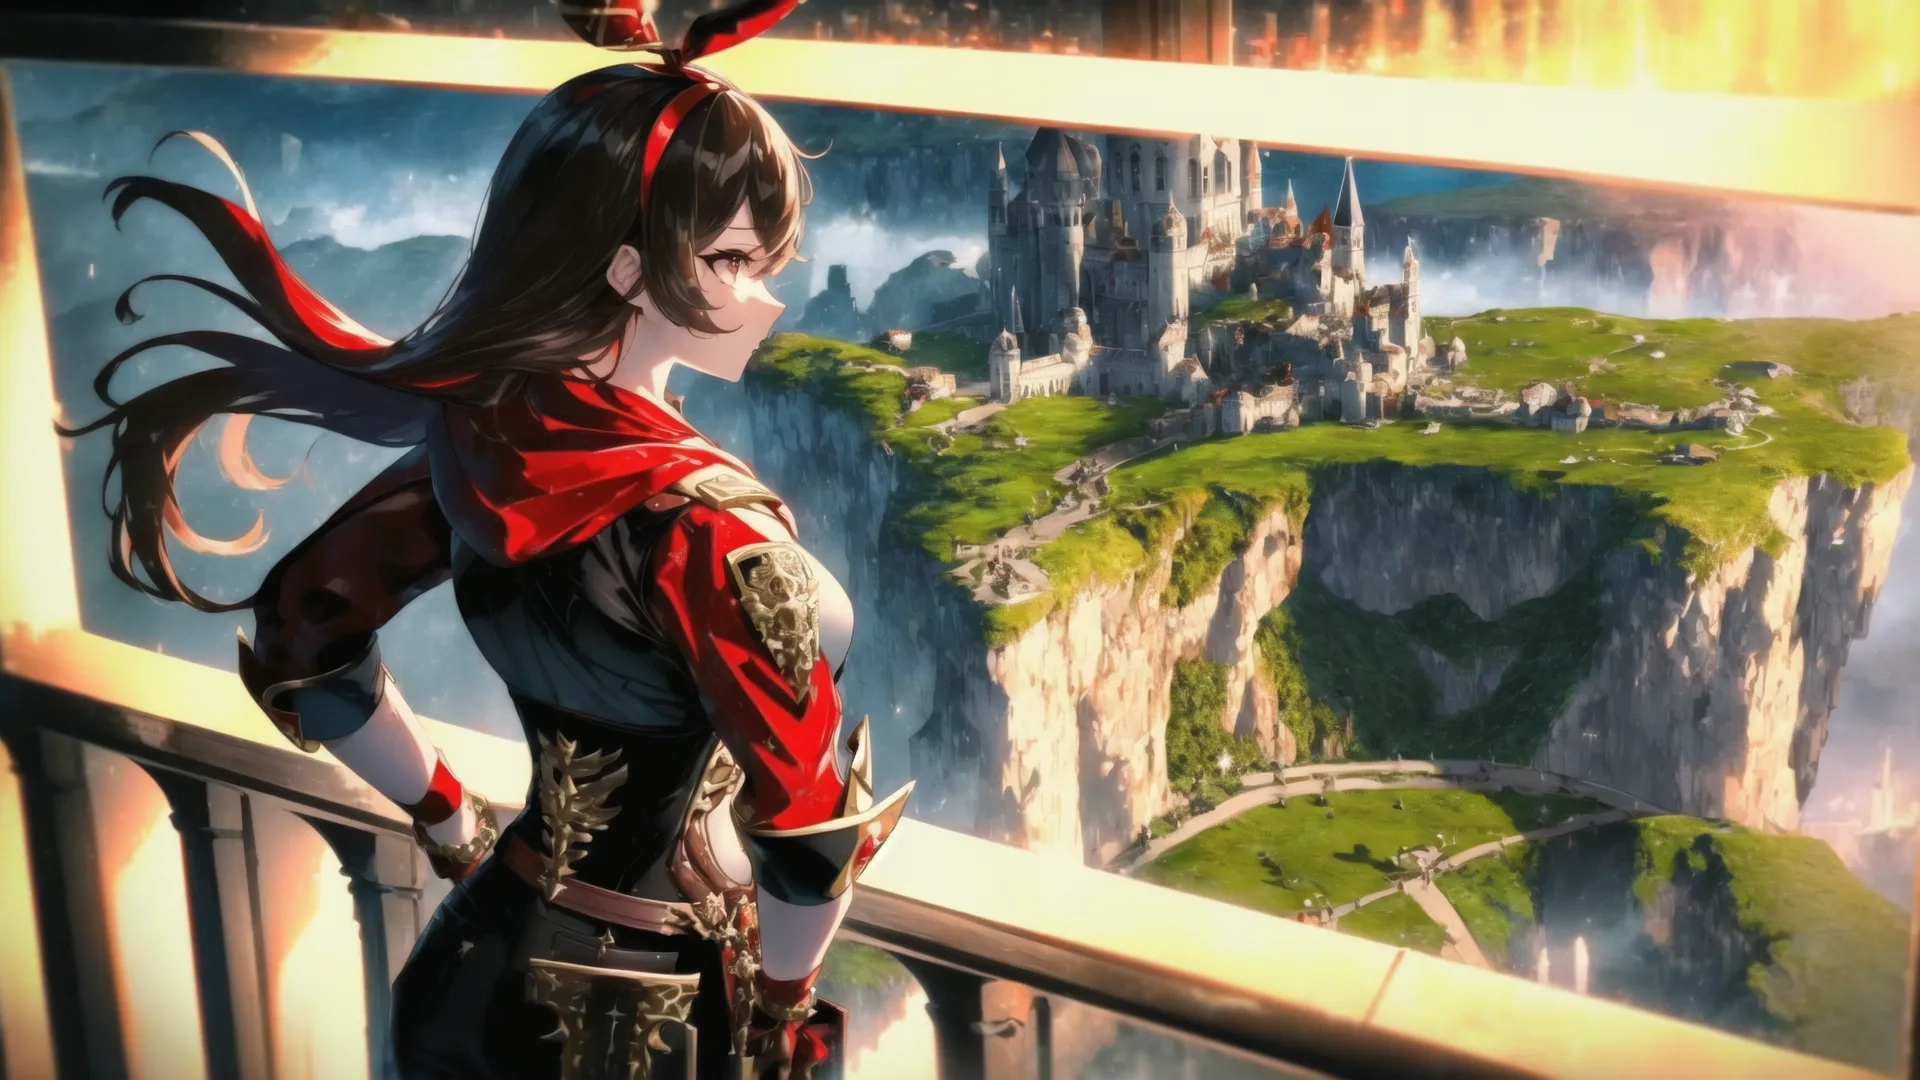 a person standing with a sword near some buildings and water cliffs in the background on a balcony below an arch scene above water, green grass, mountains, yellow sky, hills and mountains,
